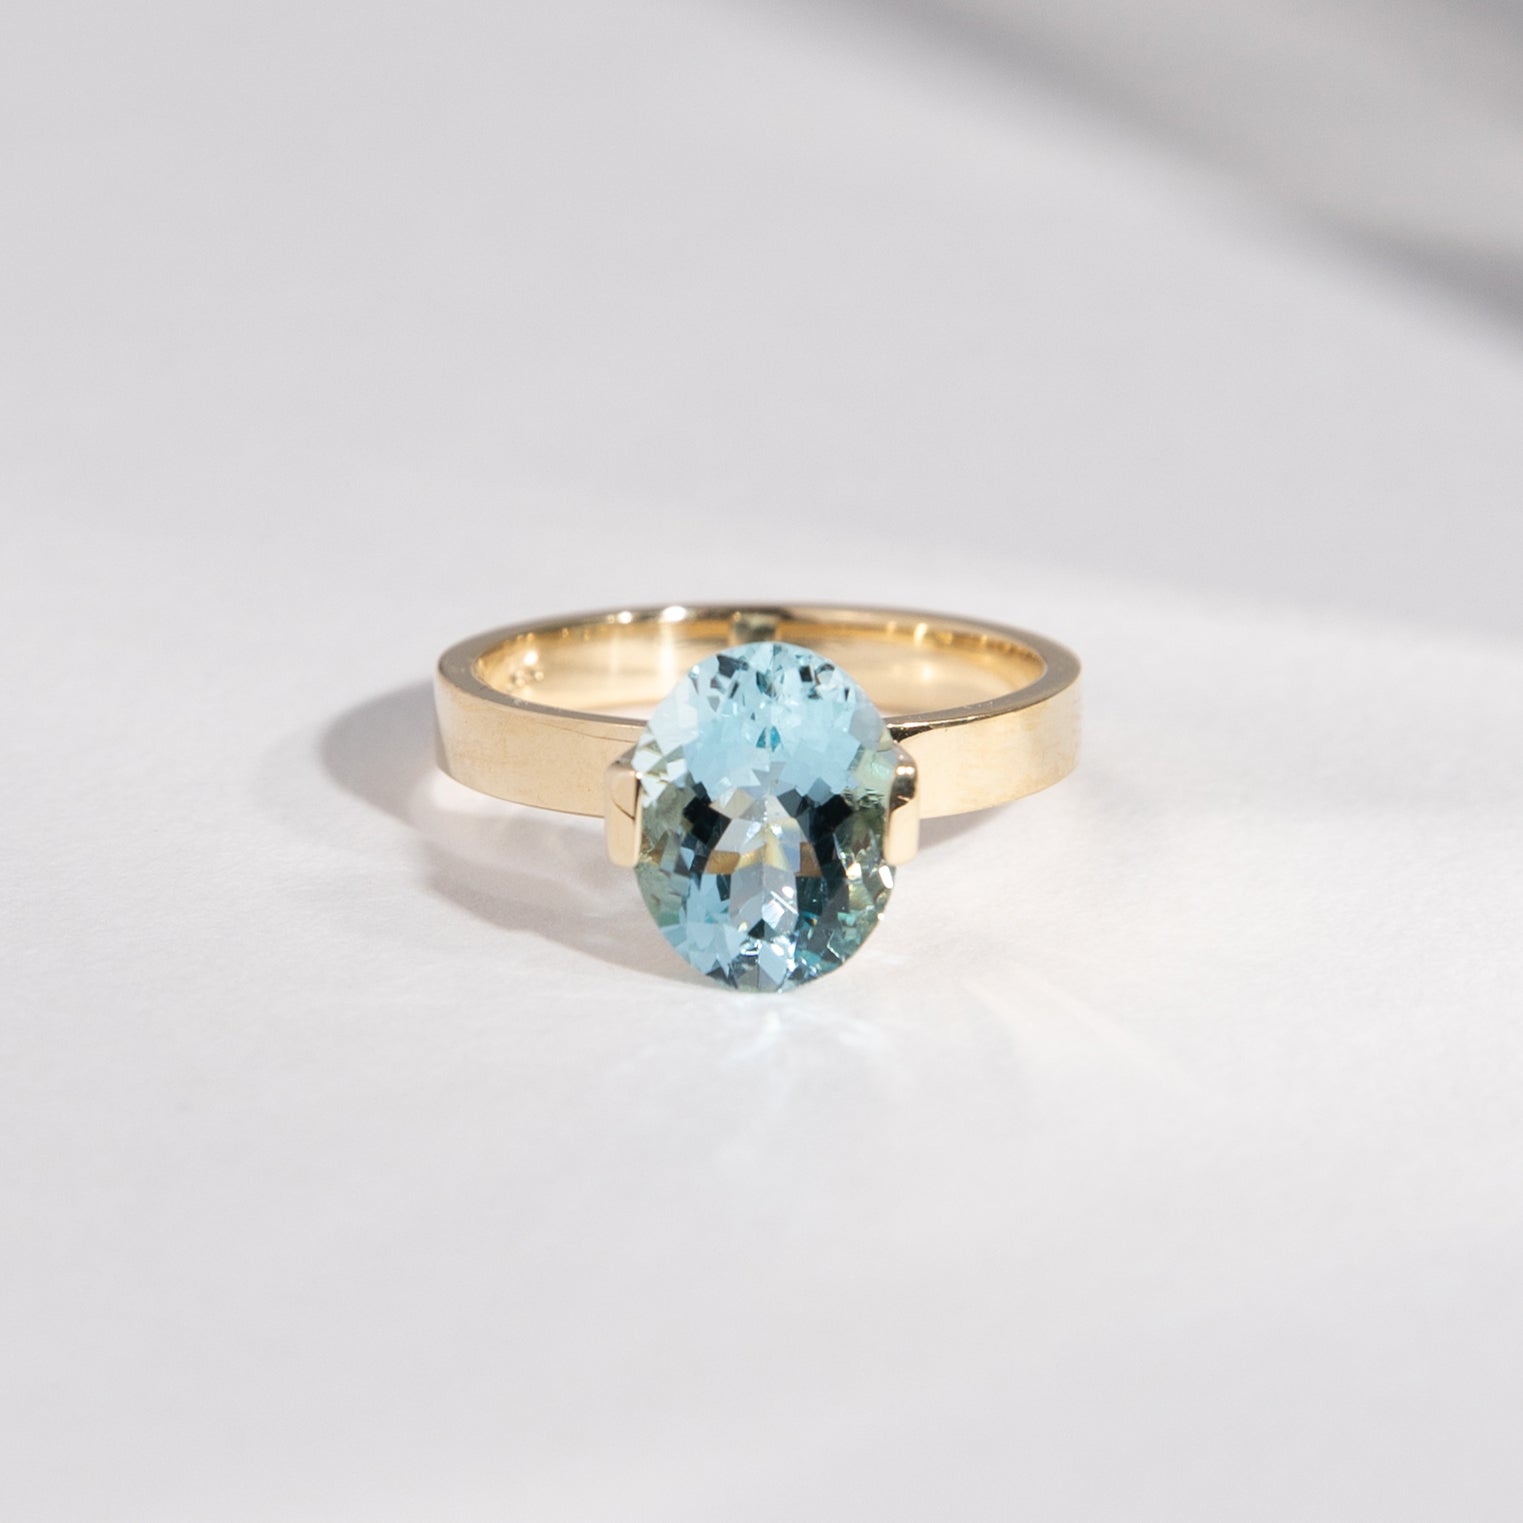 Silva Cool Ring in 14k Gold set with a 2.07ct oval brilliant cut aquamarine By SHW Fine Jewelry NYC